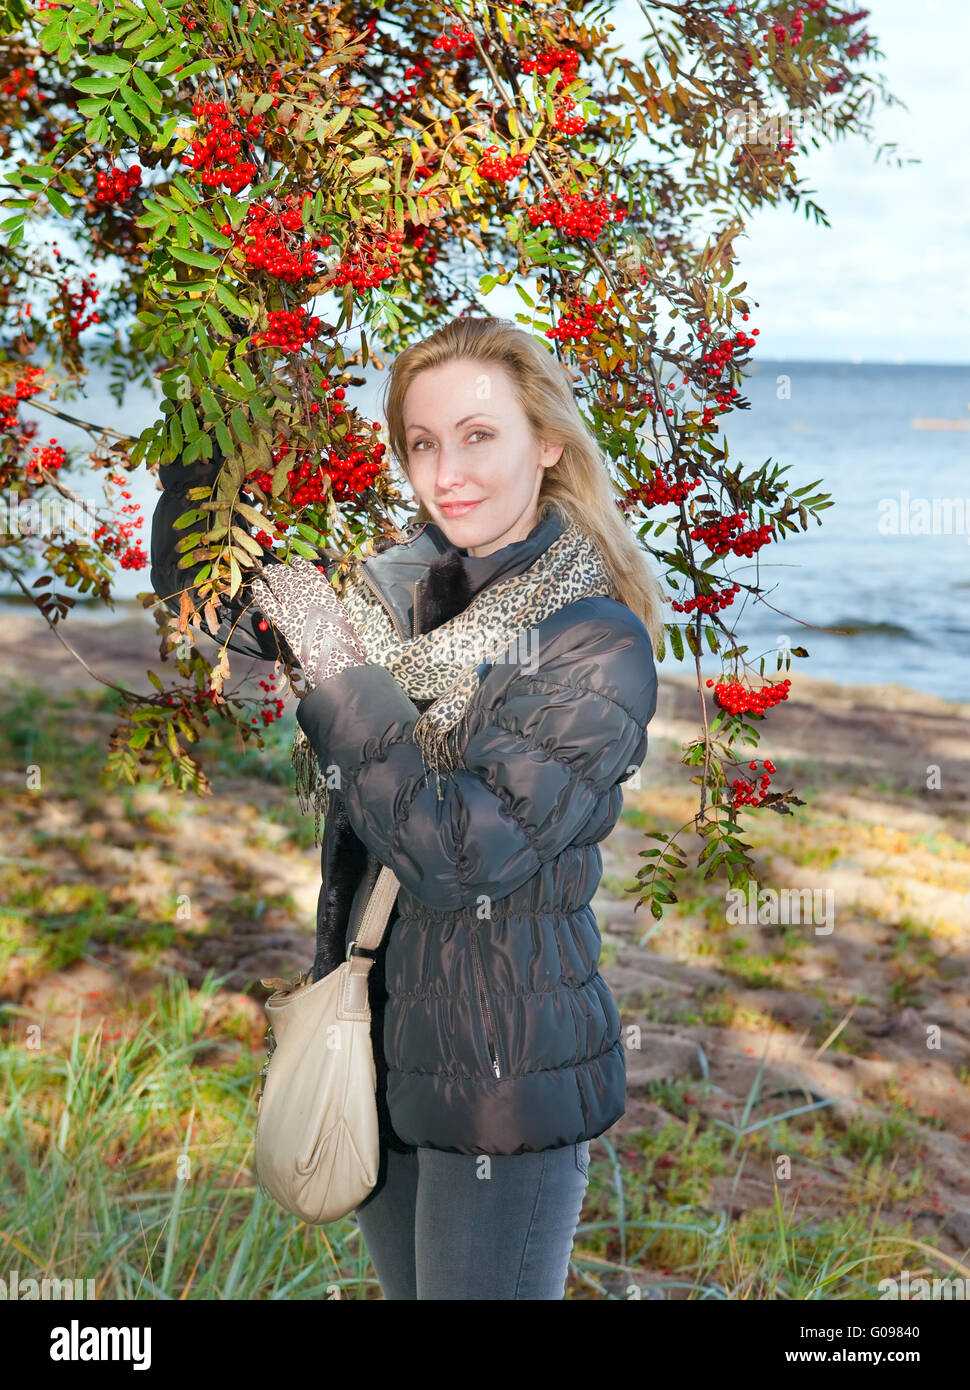 woman near red berries of a ripe mountain ash. Stock Photo